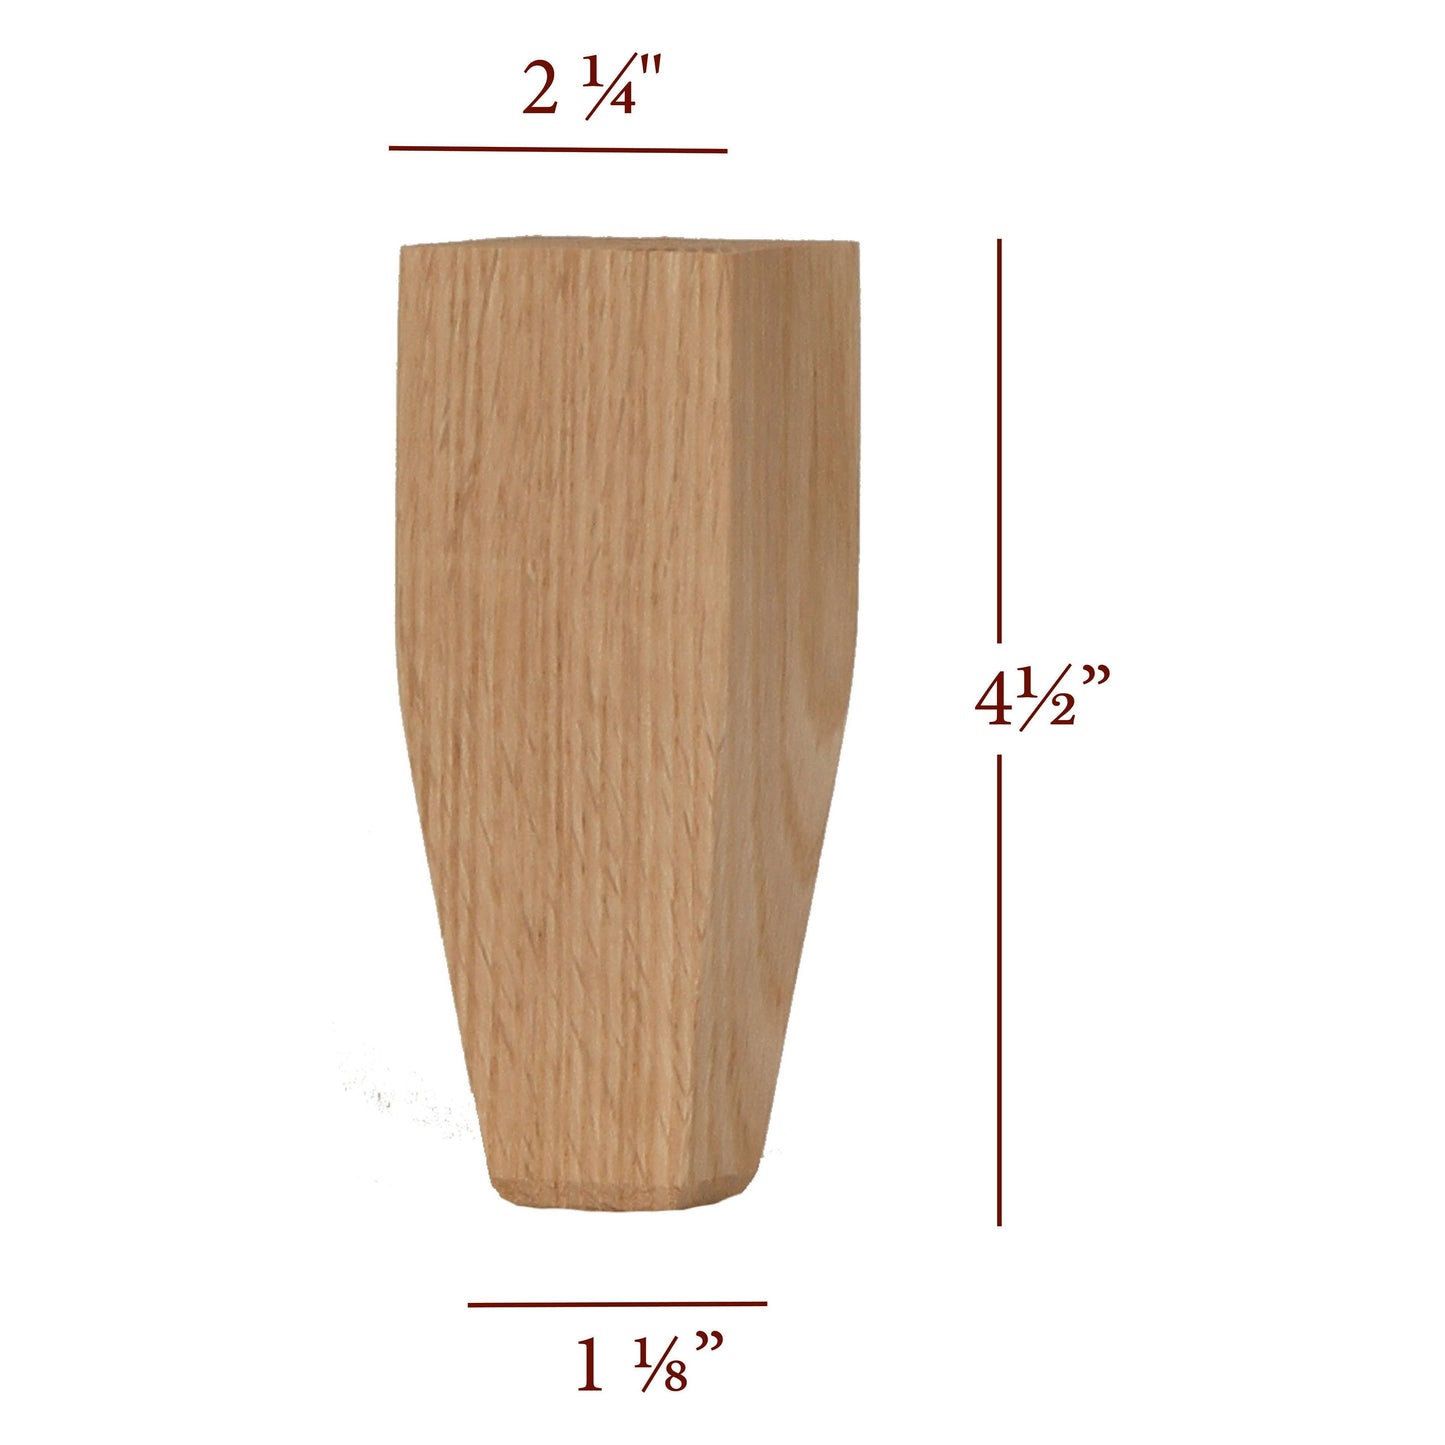 4.5" Tapered Wide Shaker Furniture Foot